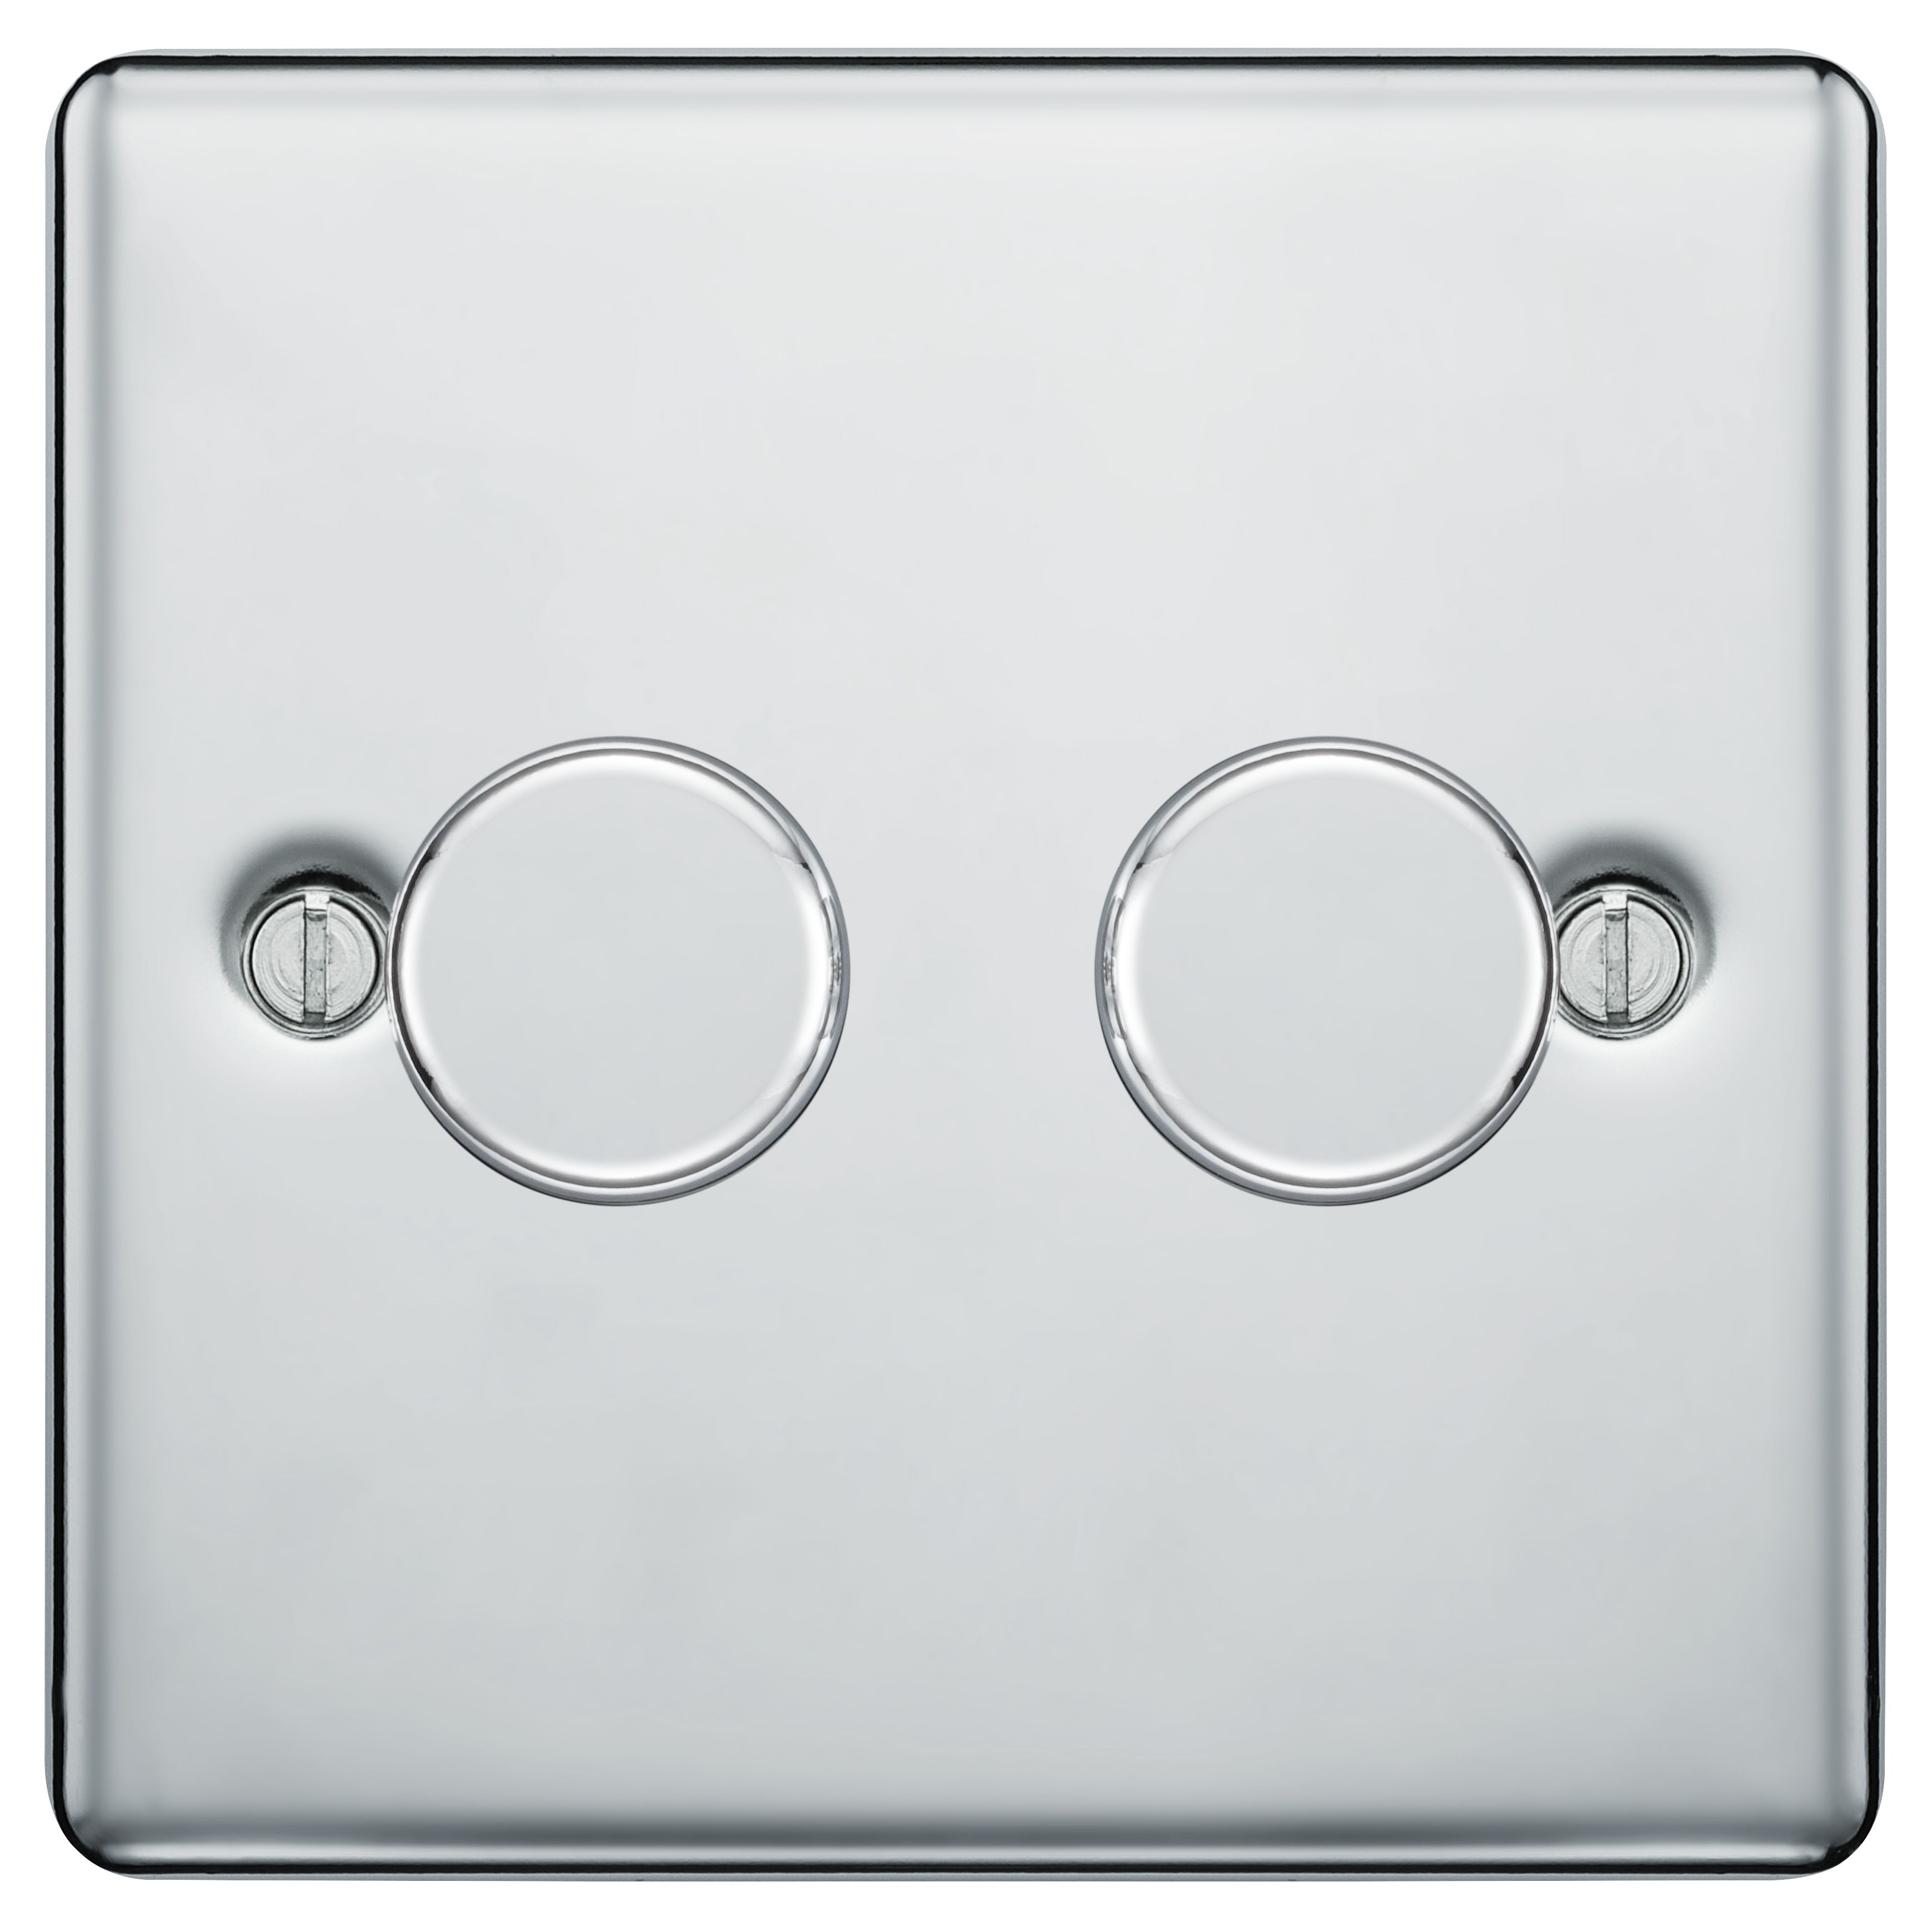 GoodHome Chrome profile Double 2 way 400W Dimmer switch